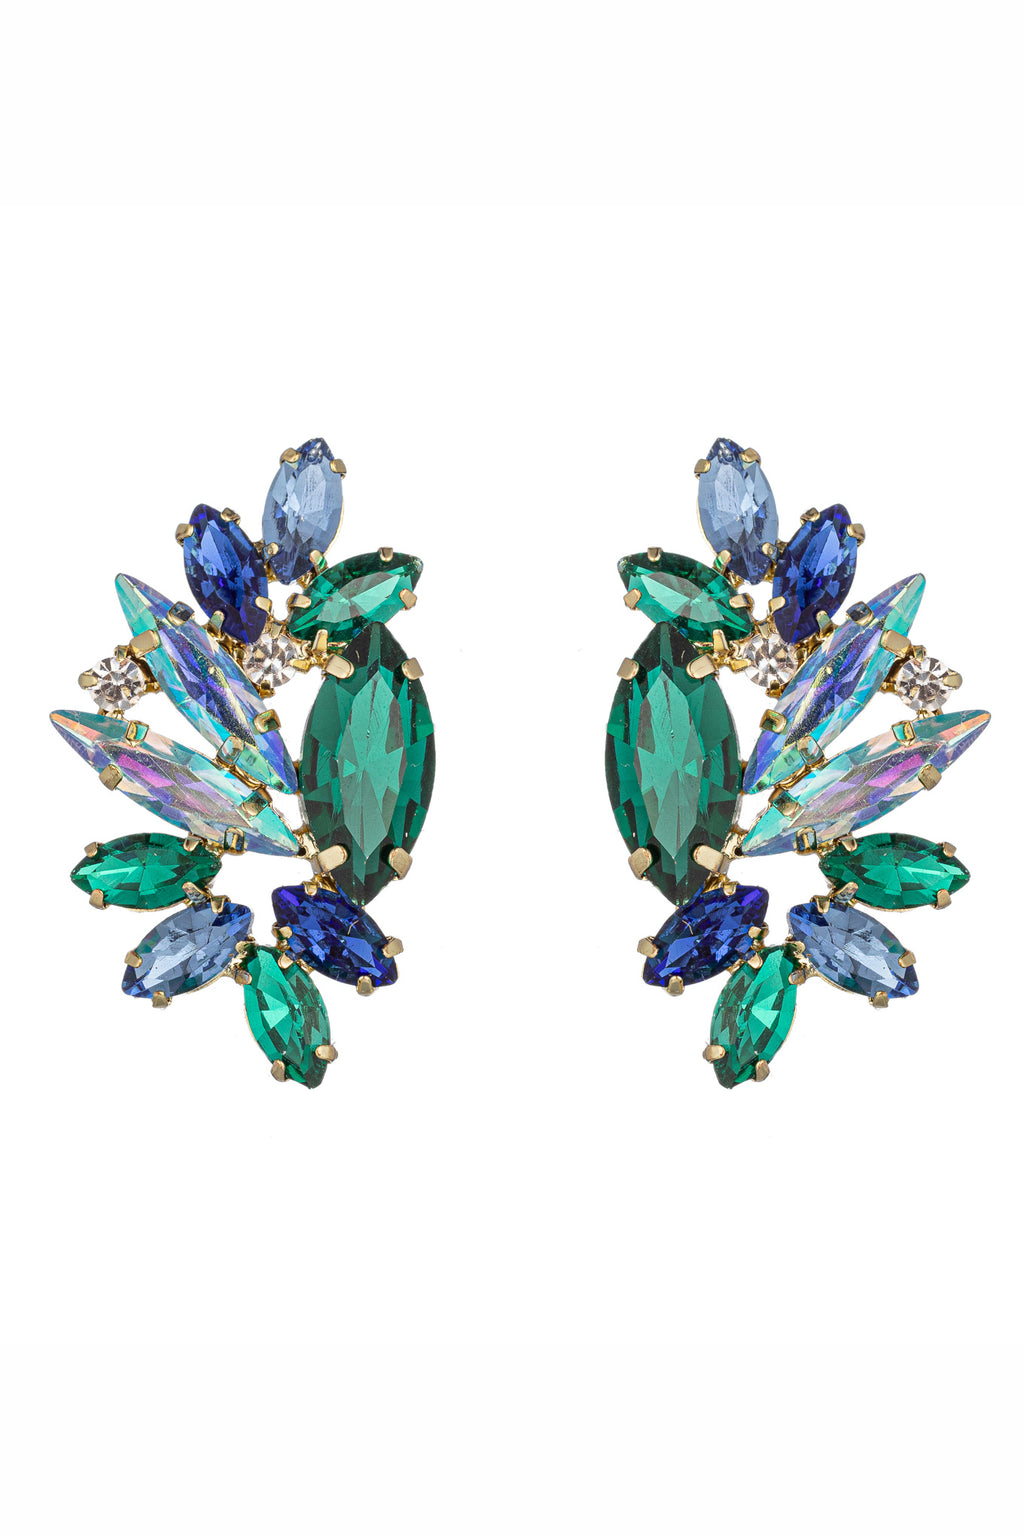 Gold tone alloy dangle statement earrings with green and blue glass crystals.